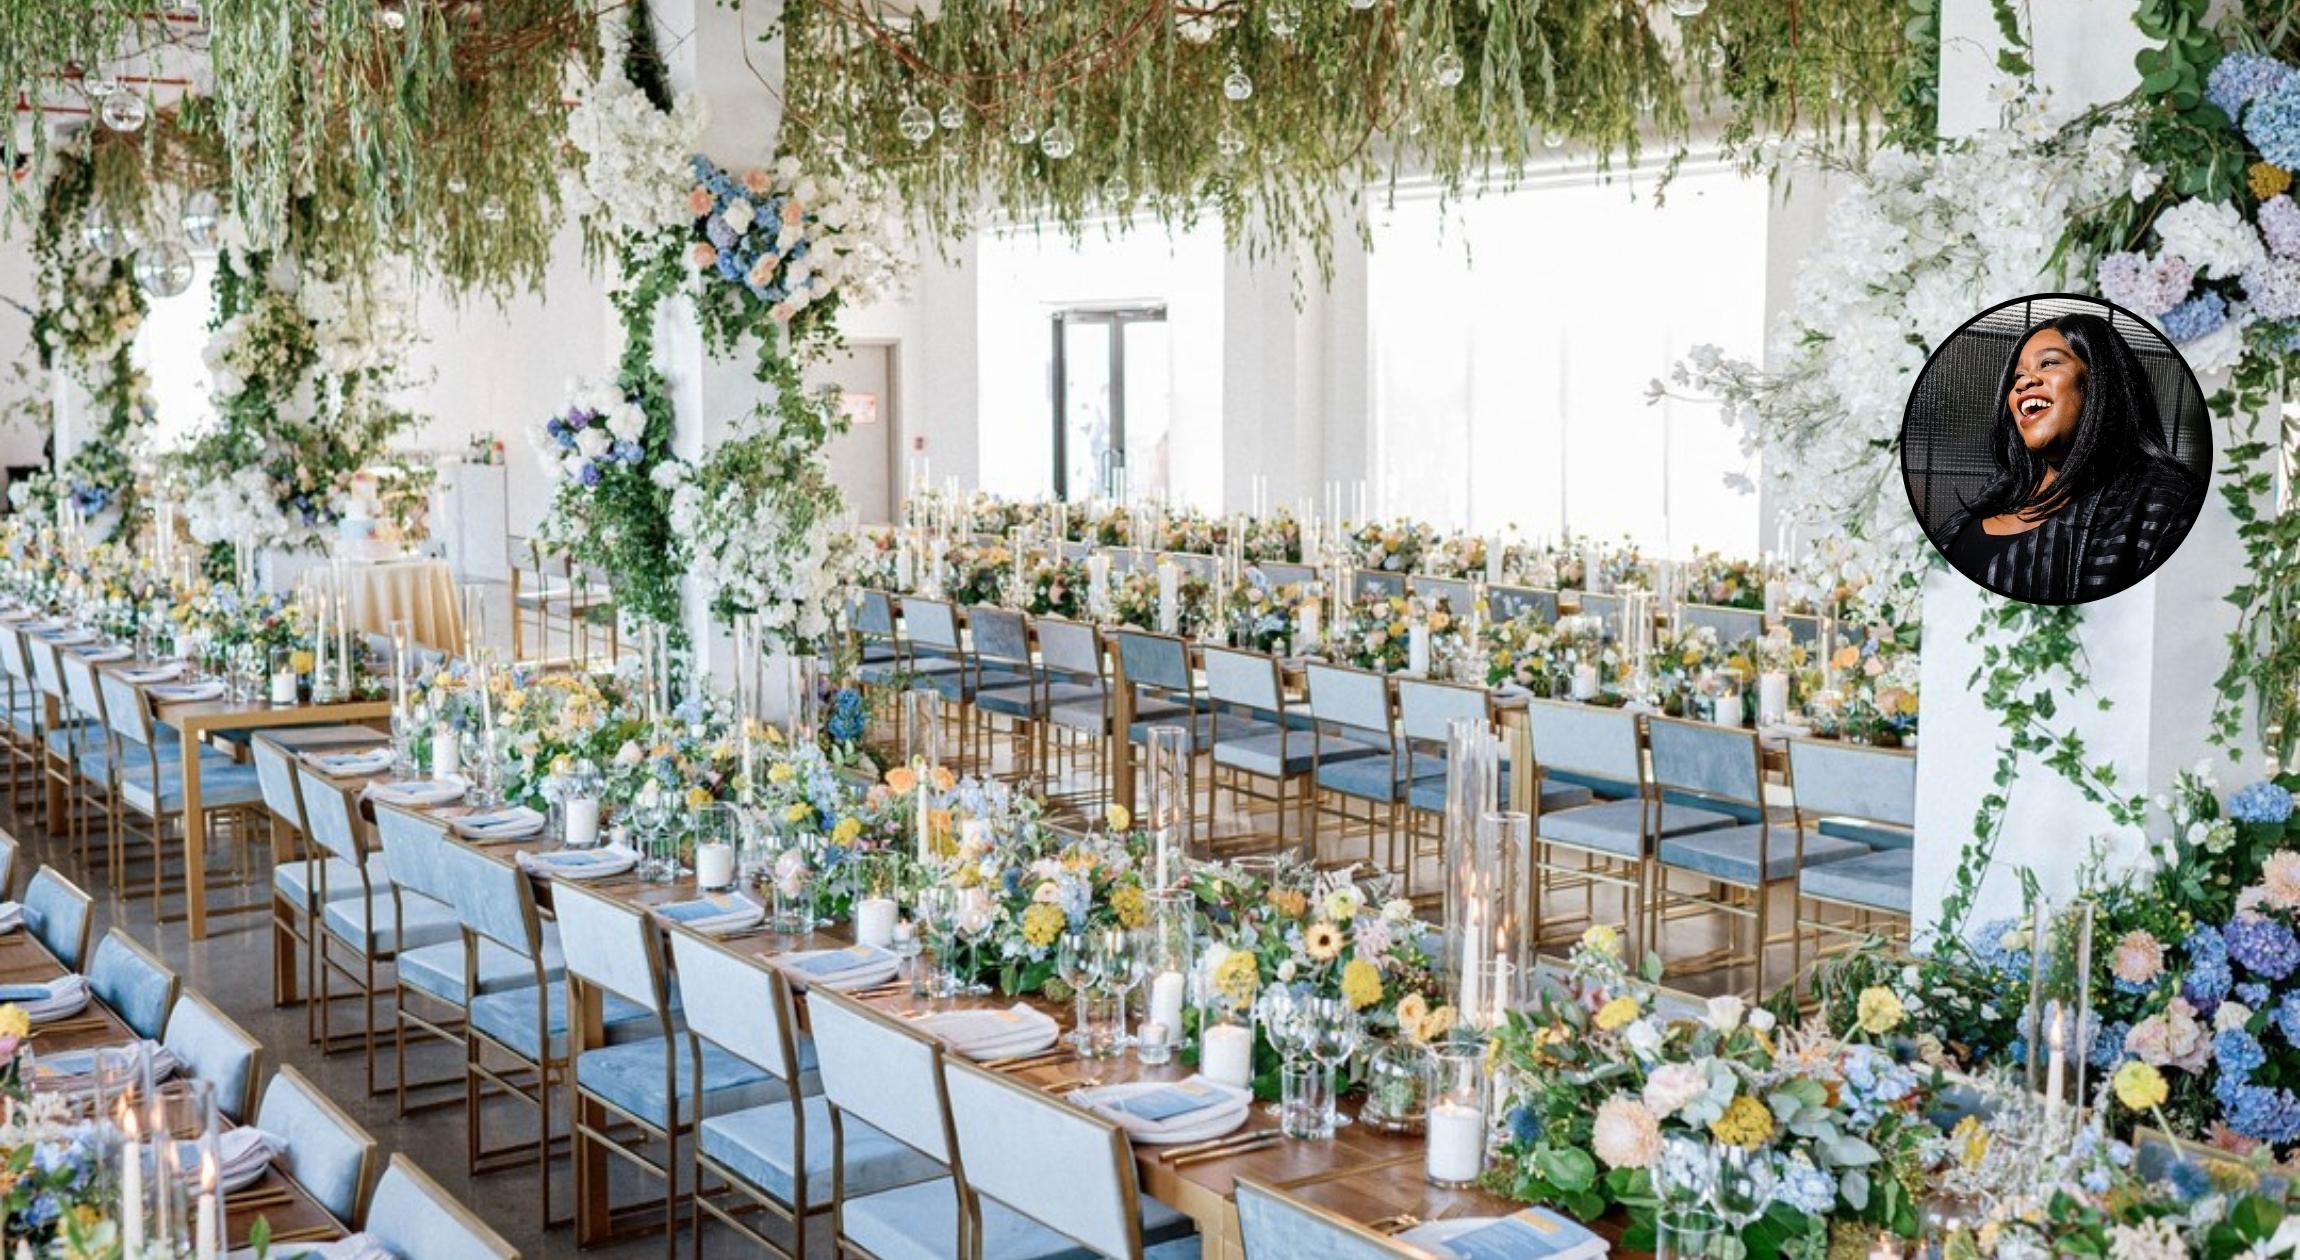 Lush wedding reception space with decorated tables filled with dinnerware and greenery